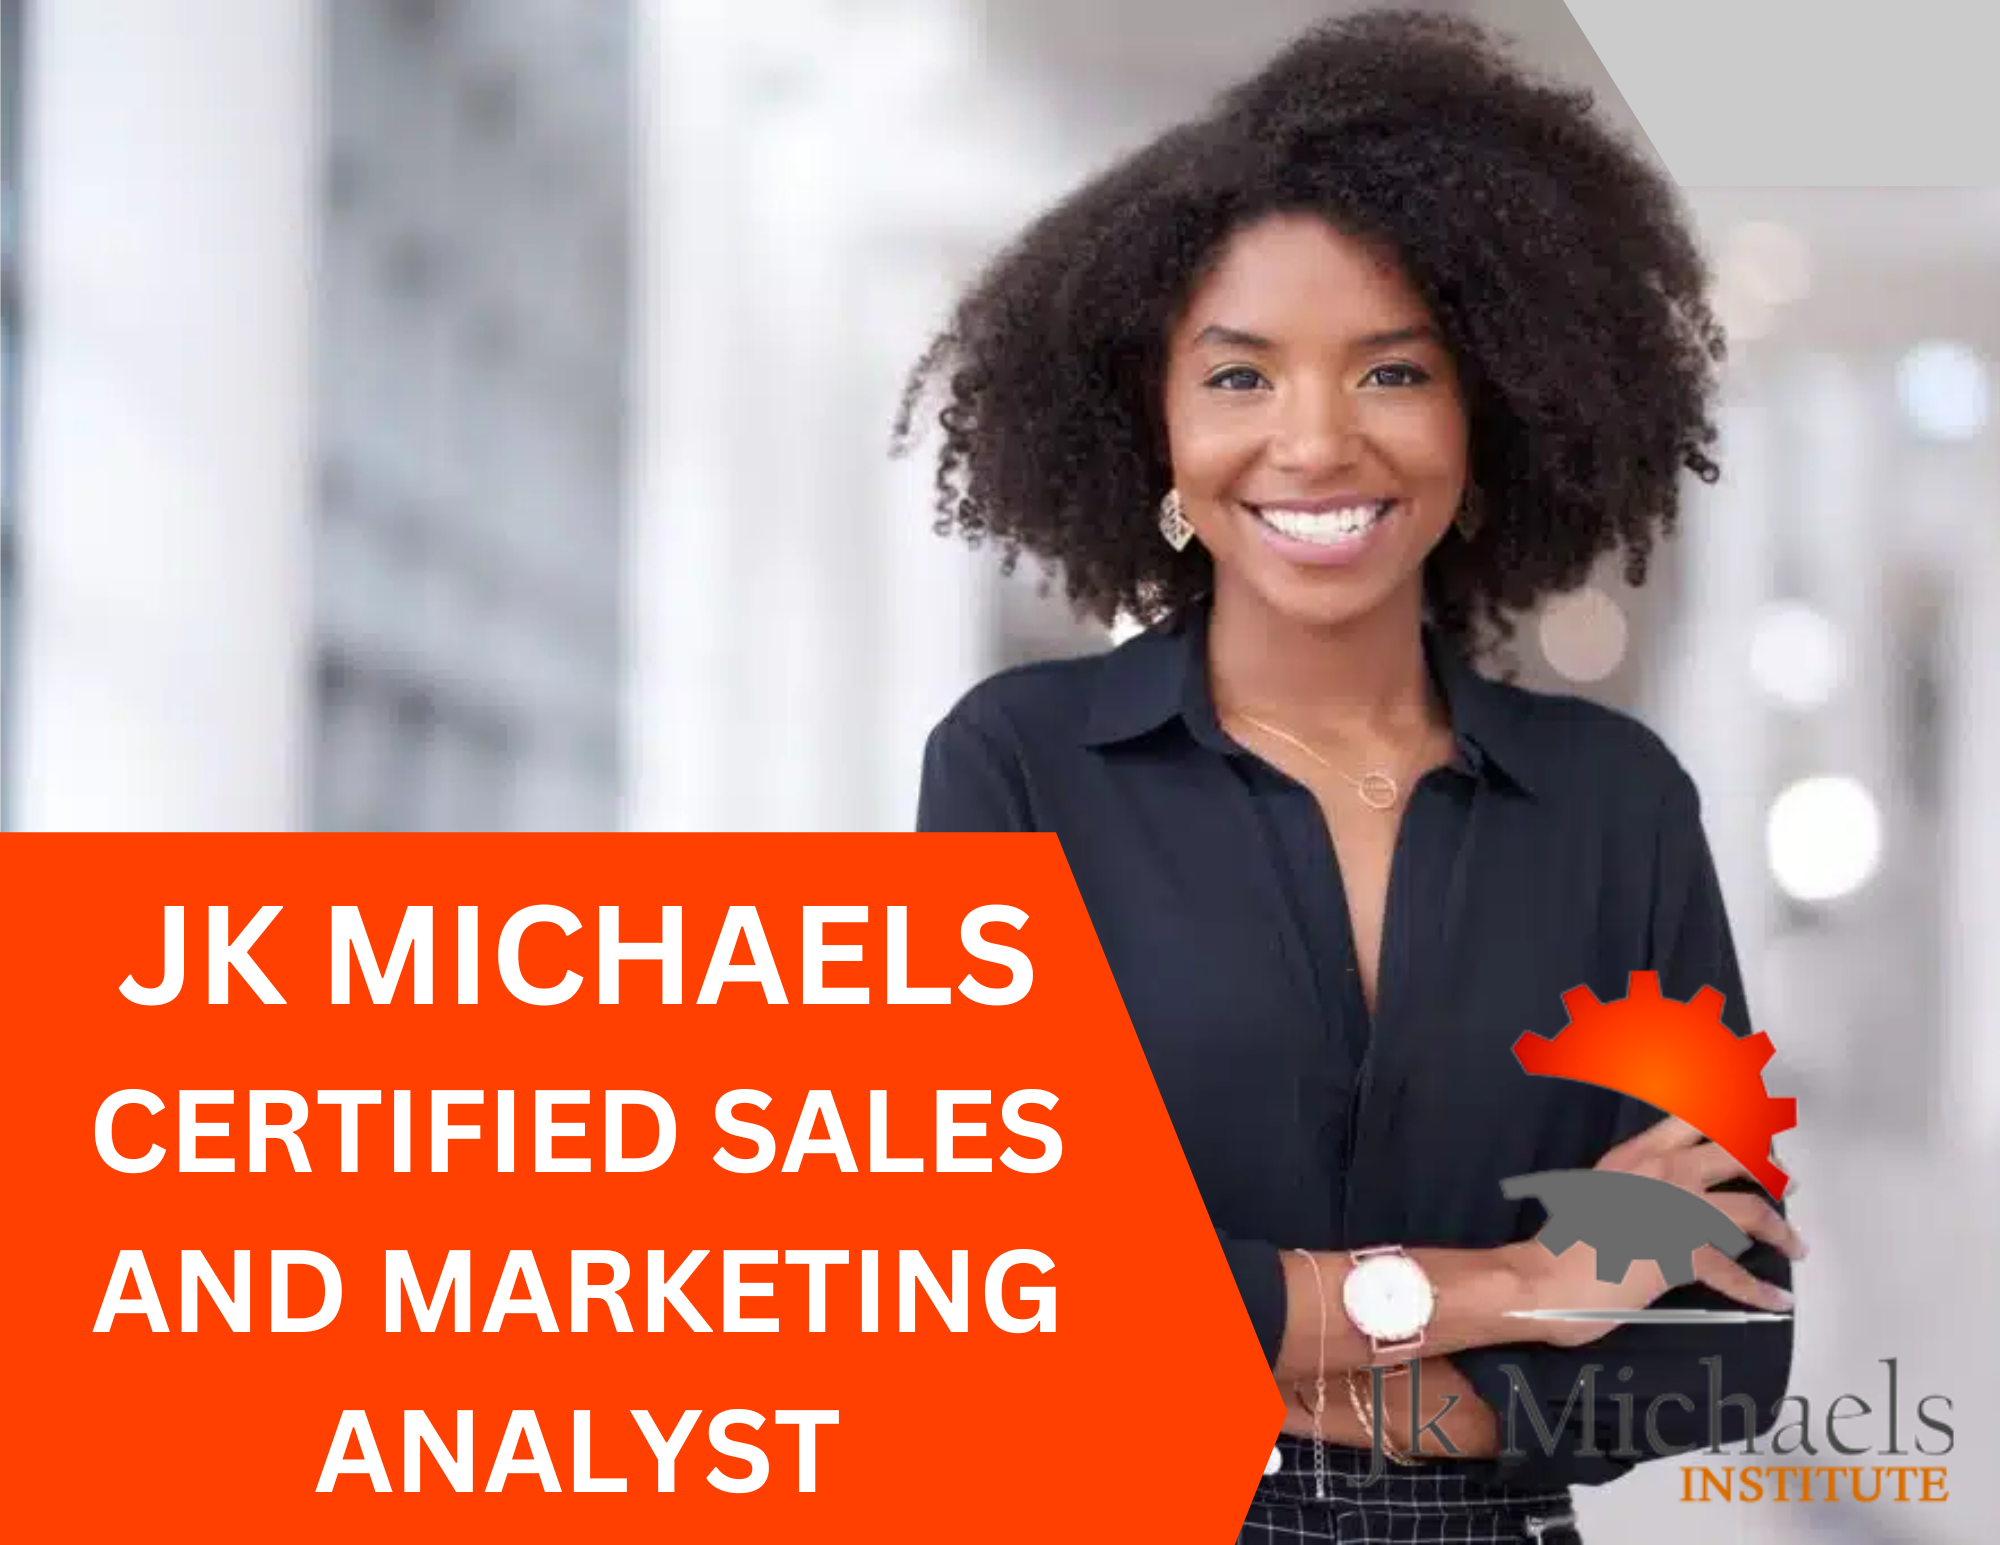 CERTIFIED SALES AND MARKETING ANALYST